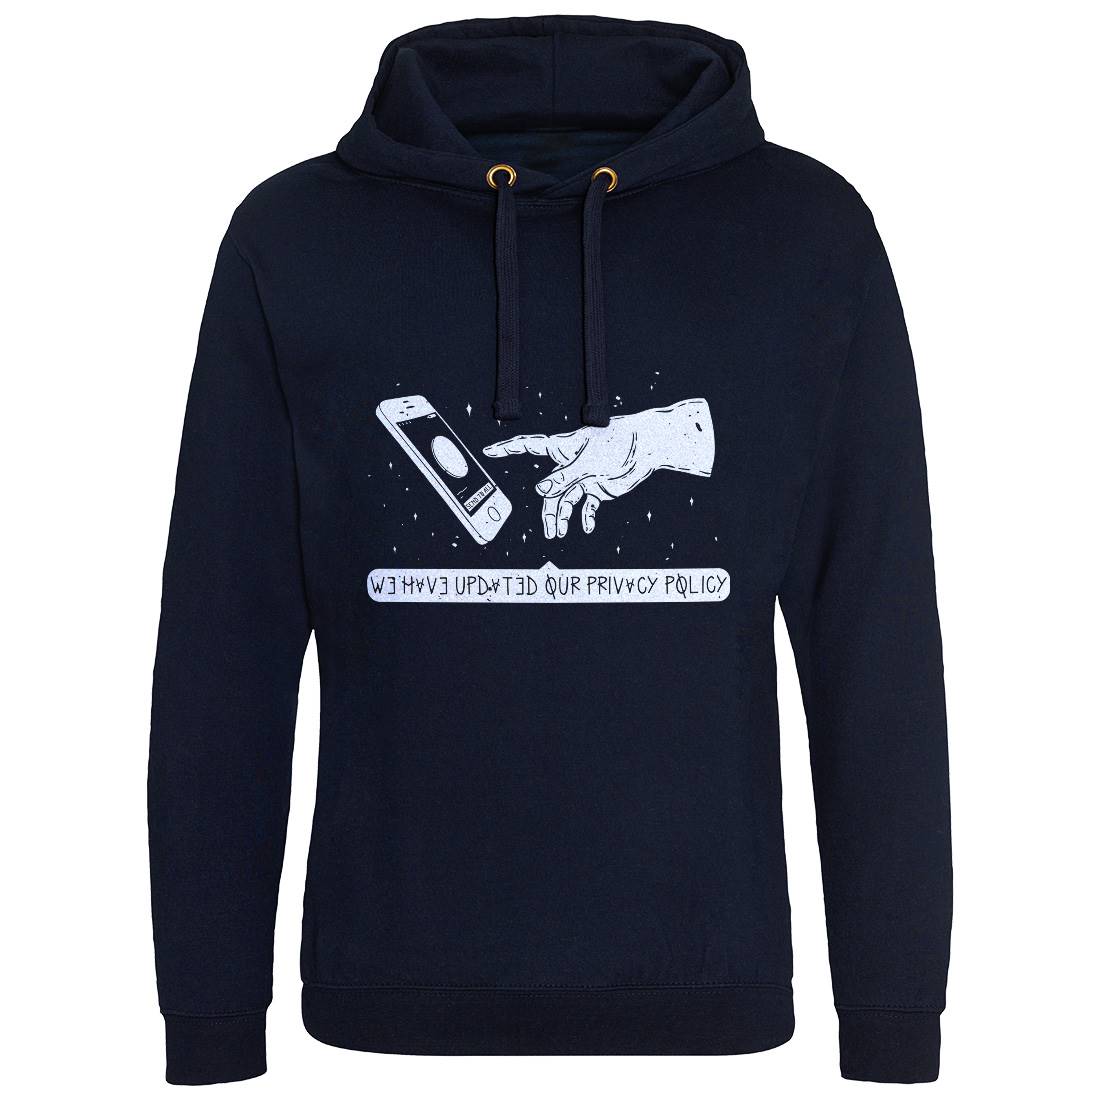 Send To All Mens Hoodie Without Pocket Media D485